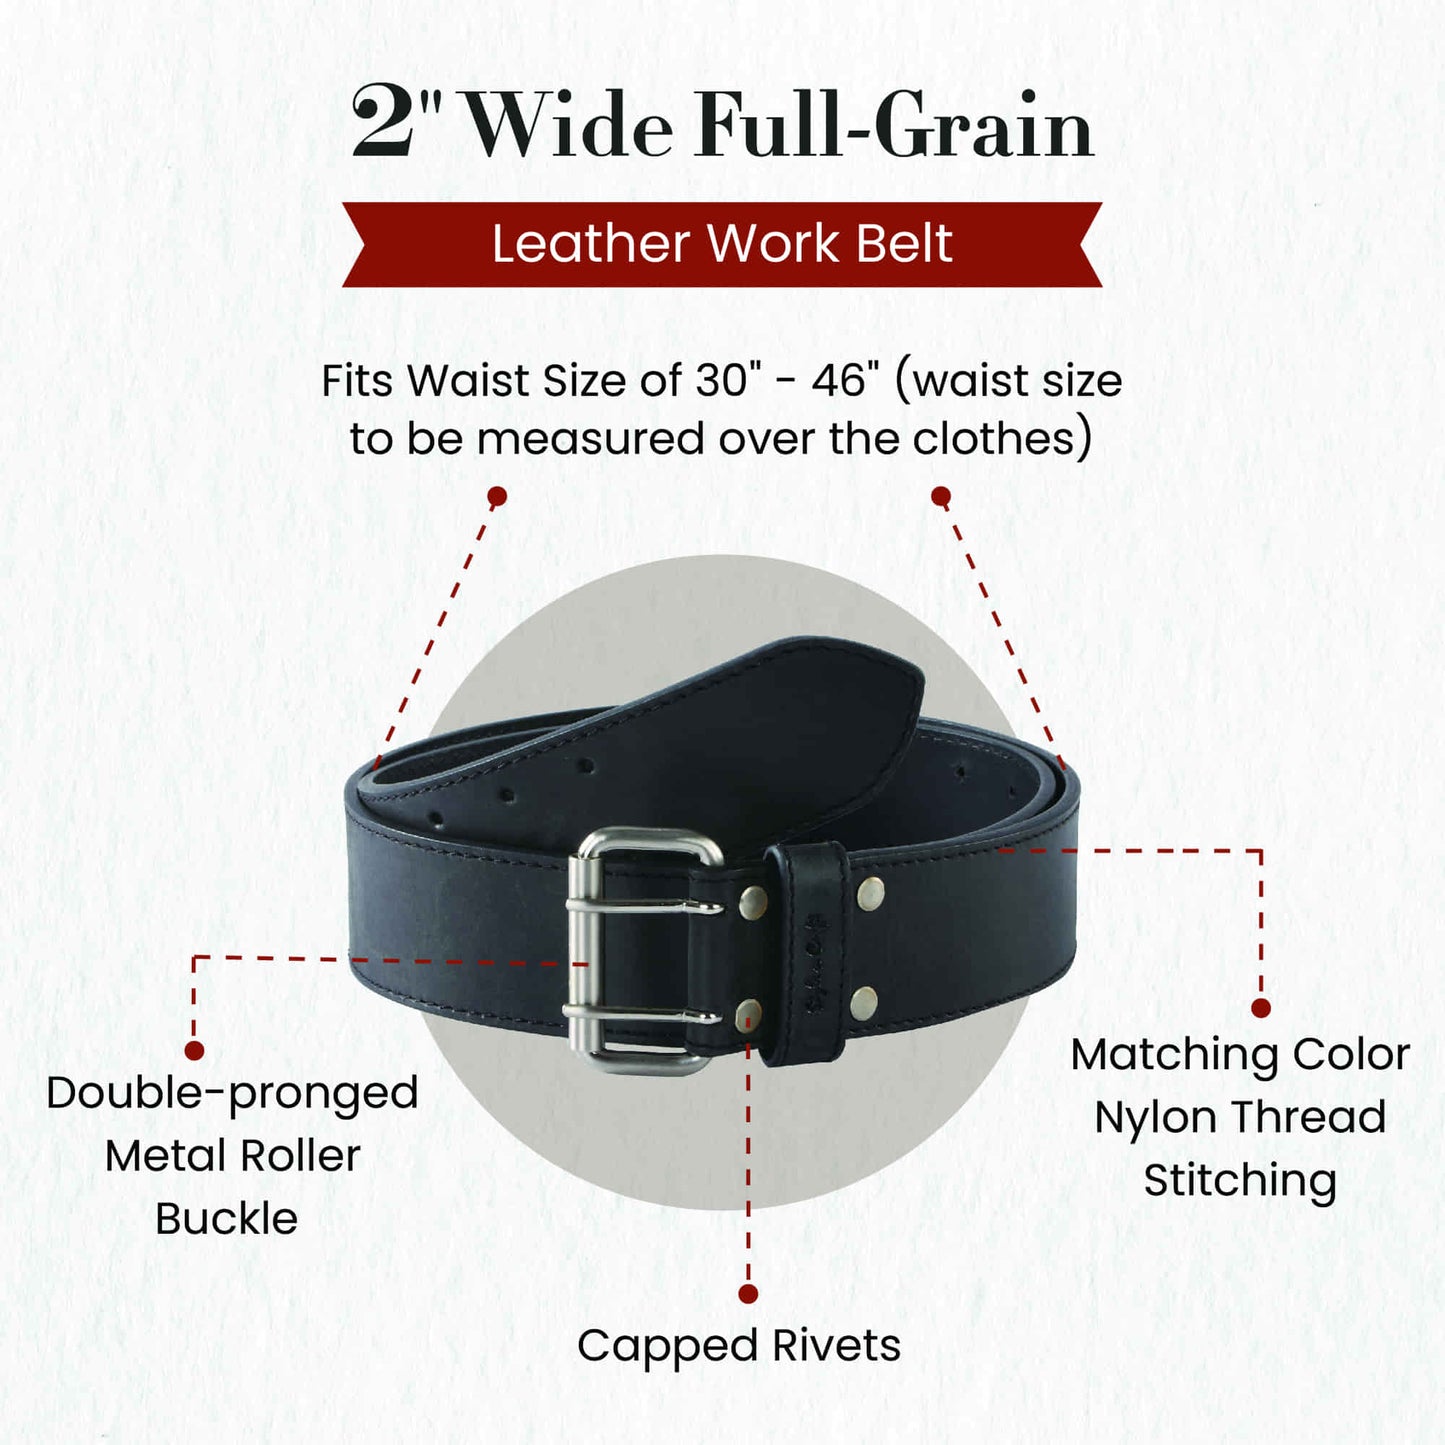 Style n Craft 392752 - 2" Wide Leather Work Belt in Black Color Heavy Top Grain Leather with Double Prong Metal Roller Buckle - Front View Showing the Details